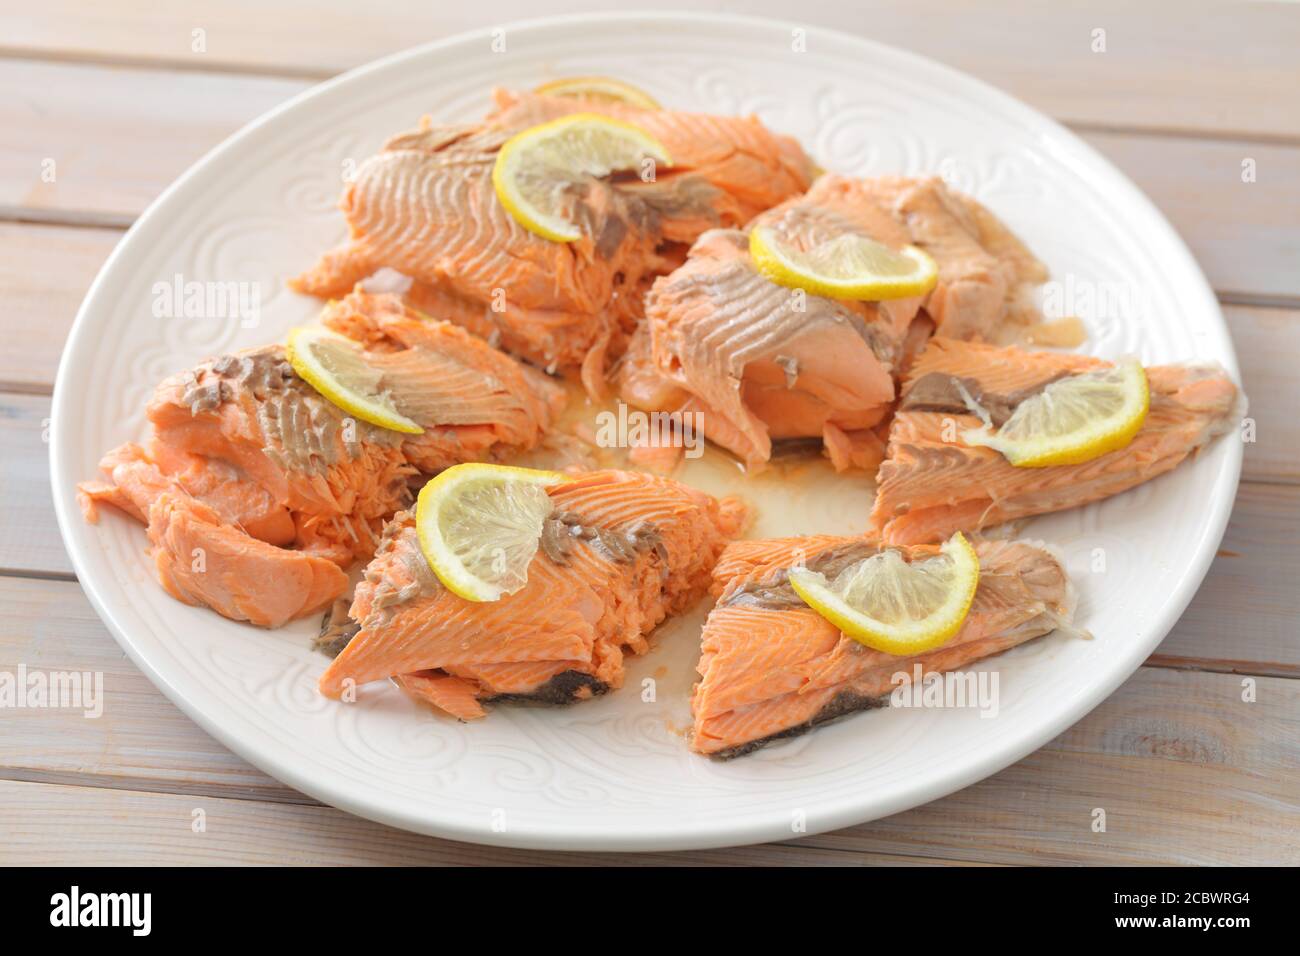 Baked trout fish served with slices of lemon Stock Photo